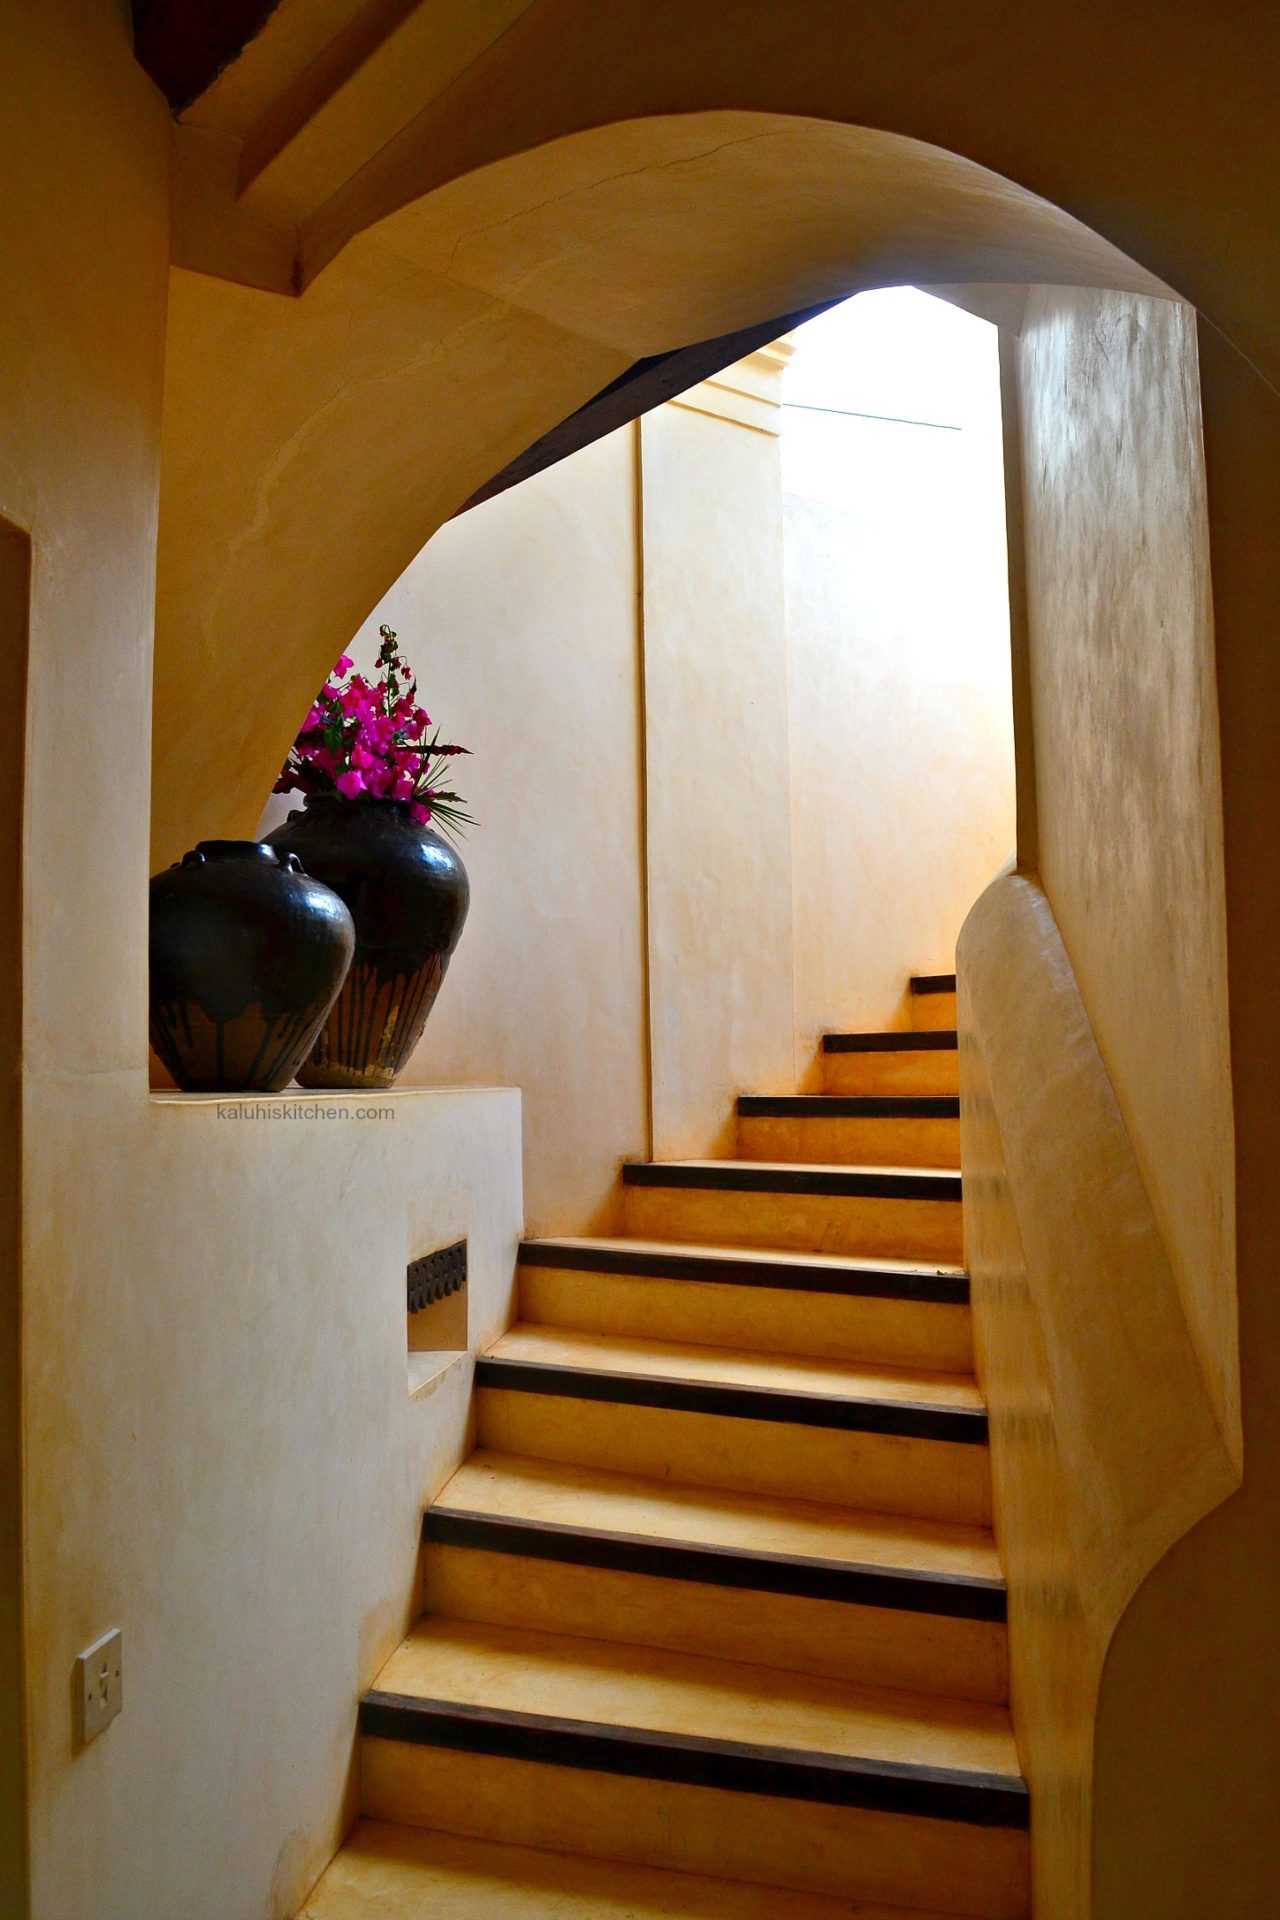 kiwandani house offers the best accomodation at the coast for a bed and breakfast at quite affordable prices_moon houses lamu_kaluhiskitchen.com